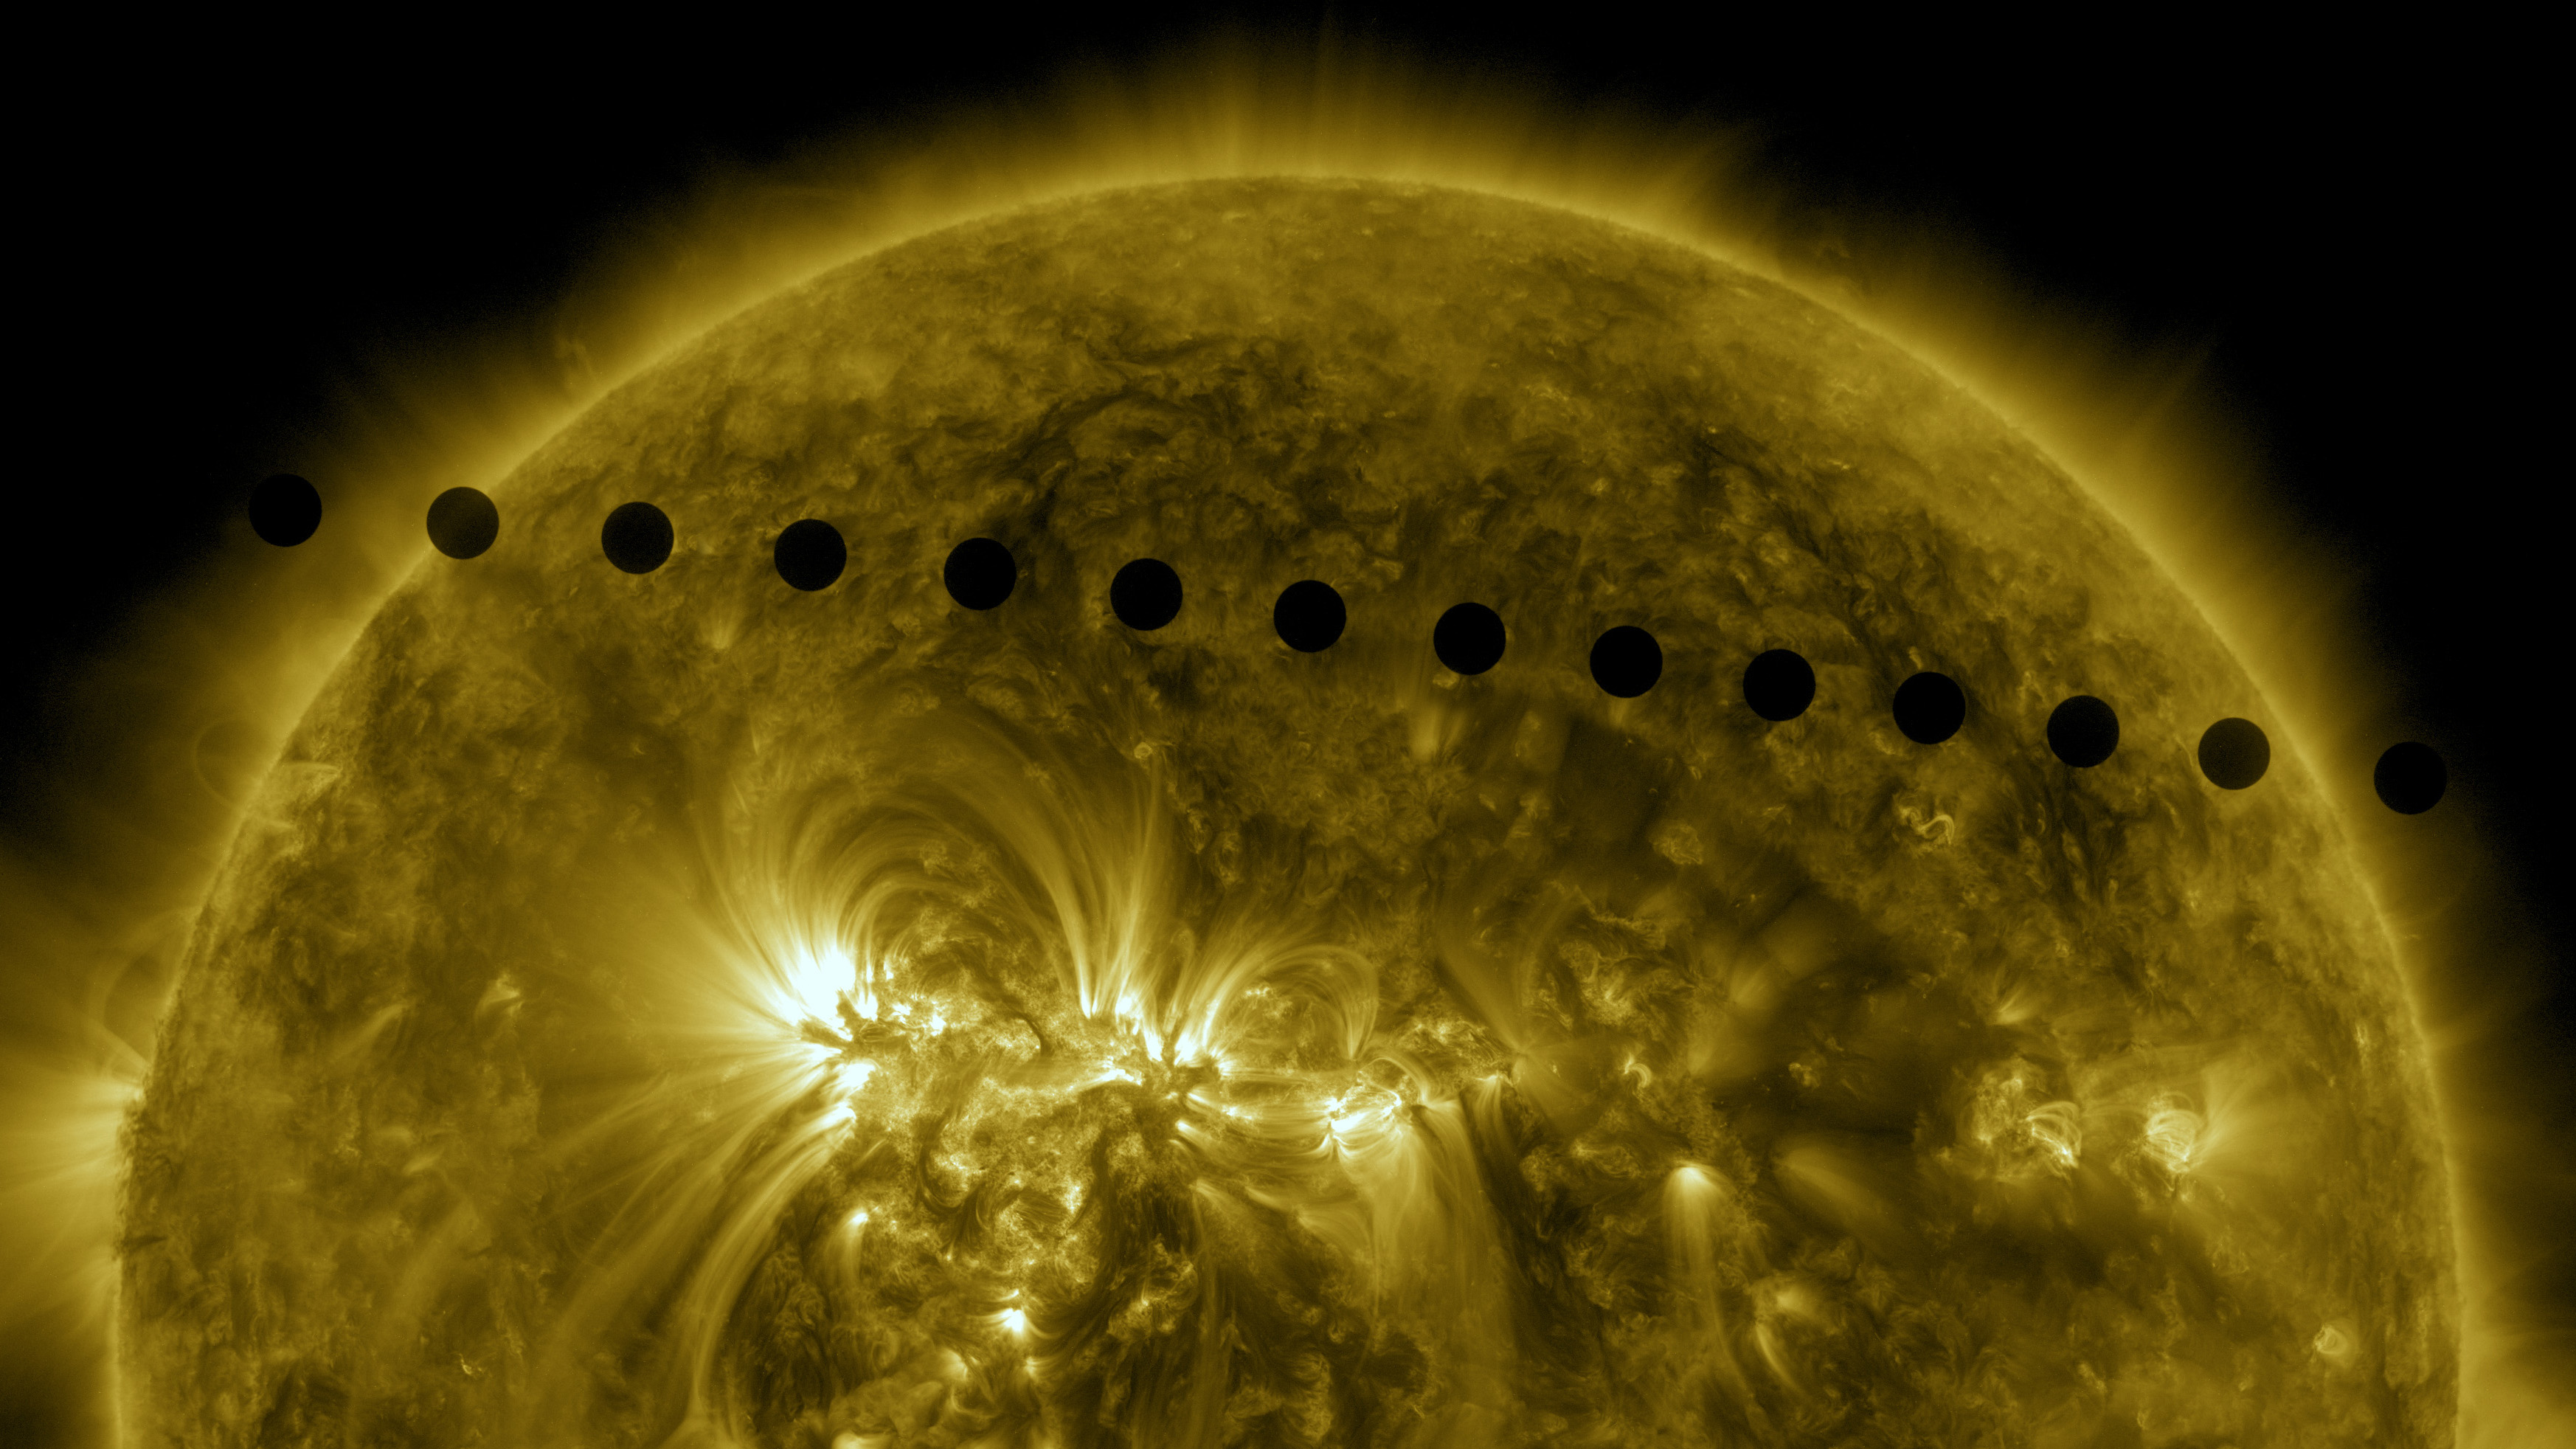 A sequence of black circles cross the face of the sun.